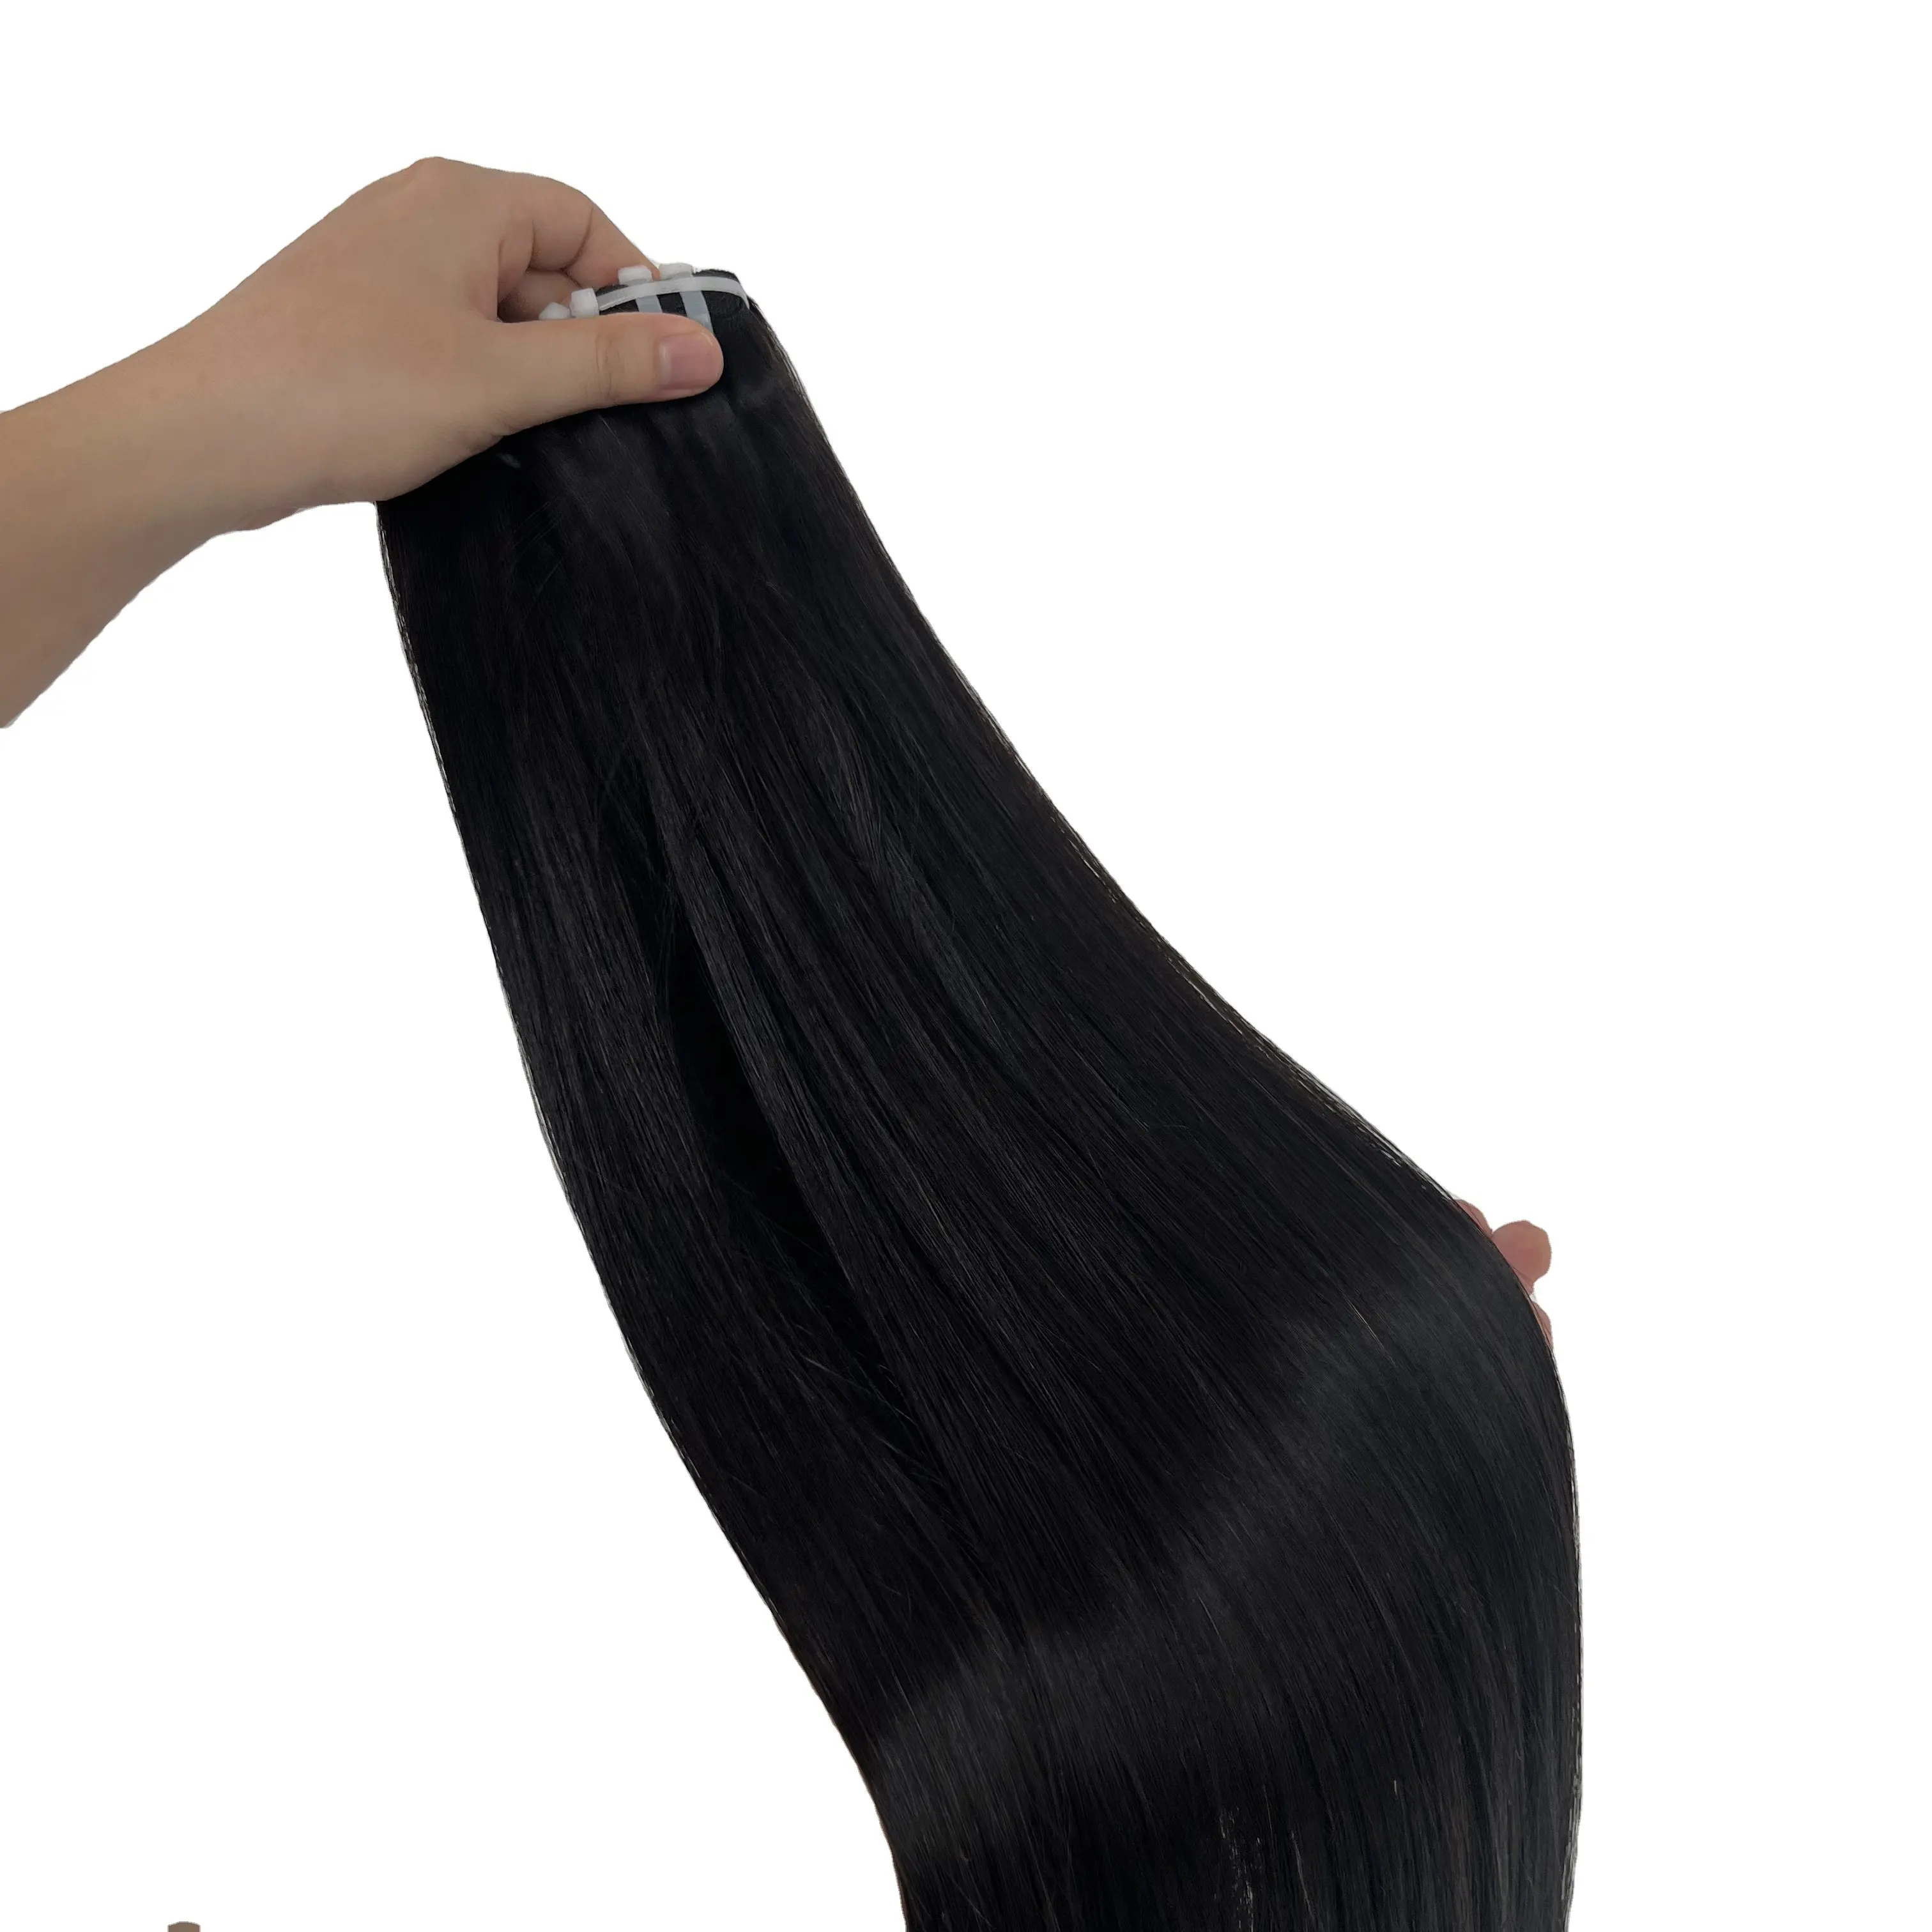 Mirror-Like Bone Straight Real Factory Wholesale Price Hair Extensions, Human Hair, Wigs Human Hair Lace Front